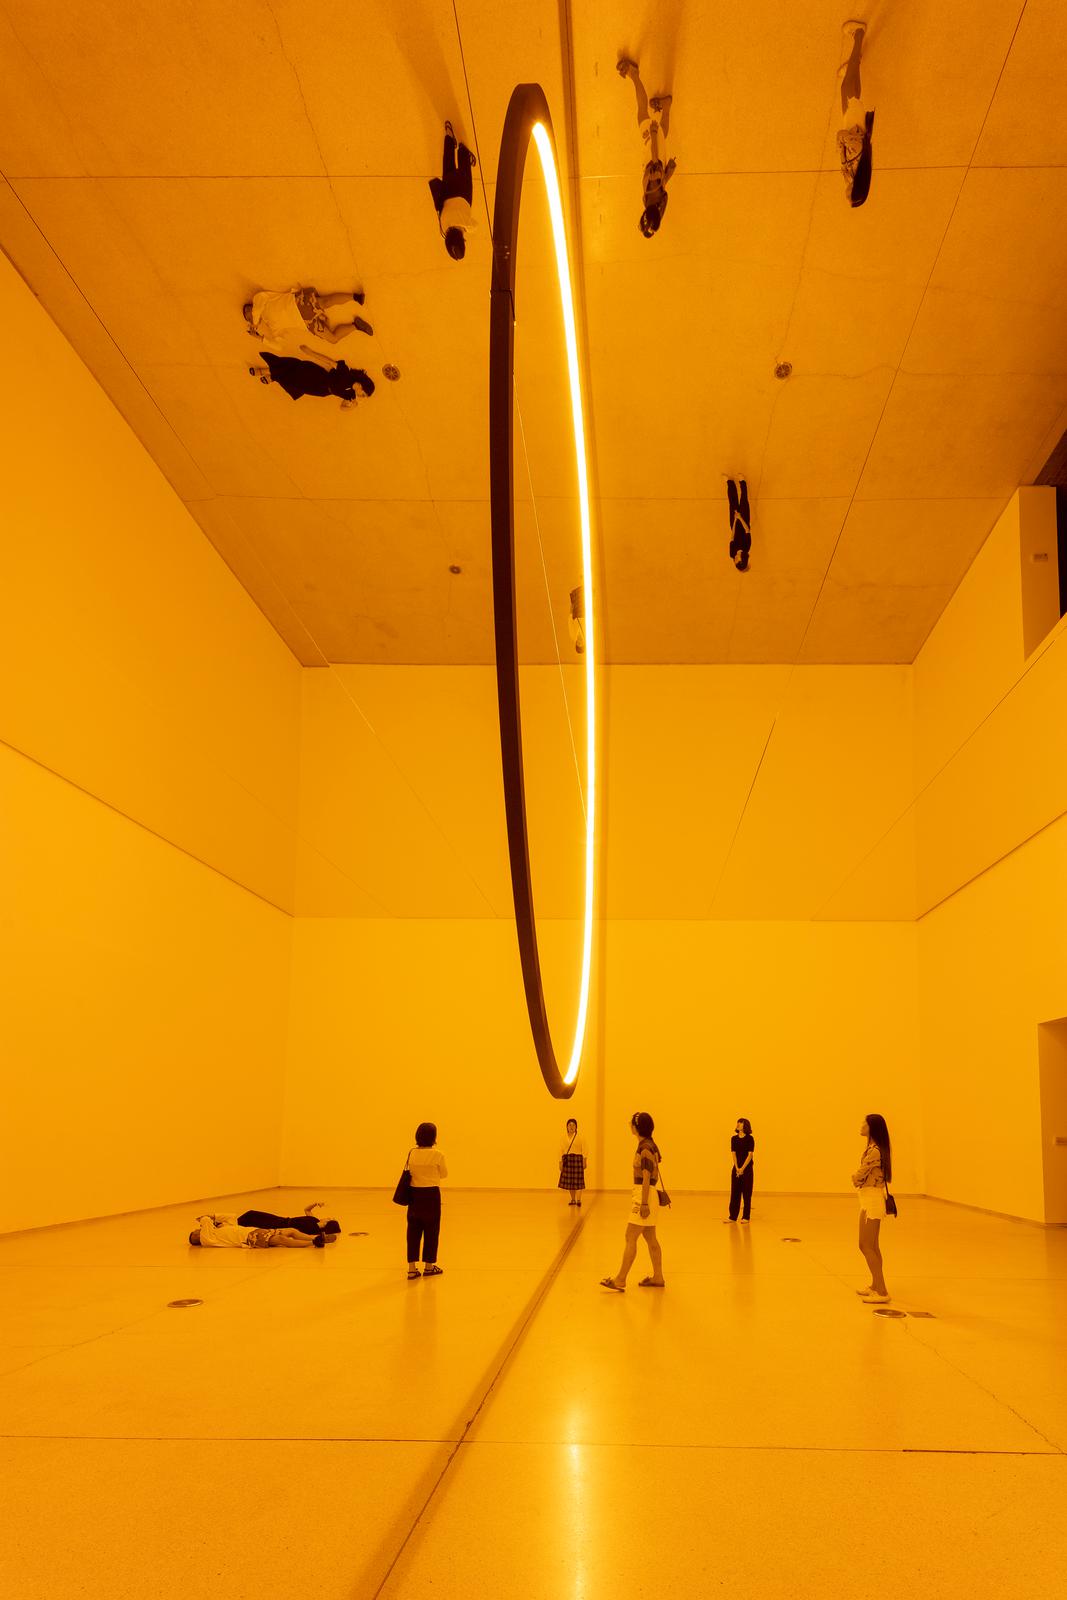 The unspeakable openness of things (2018) by Olafur Eliasson. Photo by Anders Sune Berg, courtesy of the artist's studio